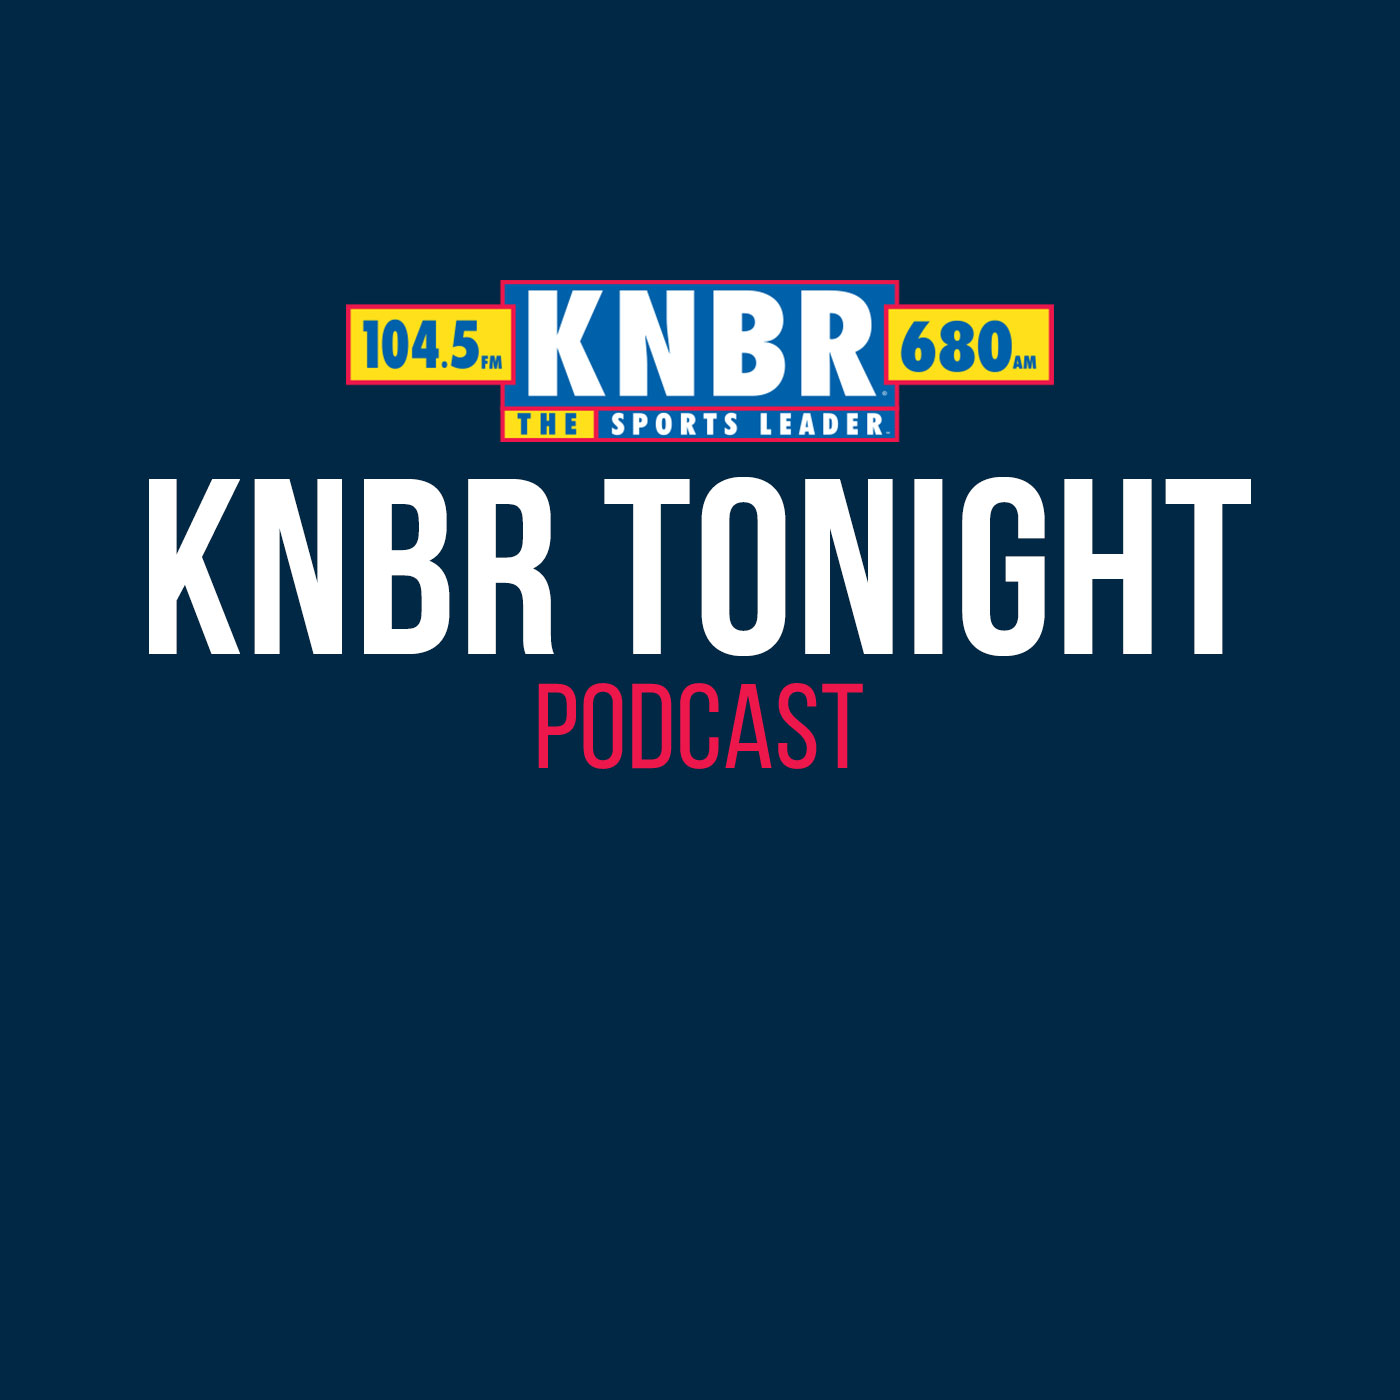 4-7 Bill Riley joins KNBR Tonight with Scott Reiss to preview the possibility the Jazz face the Warriors in the first round of the playoffs